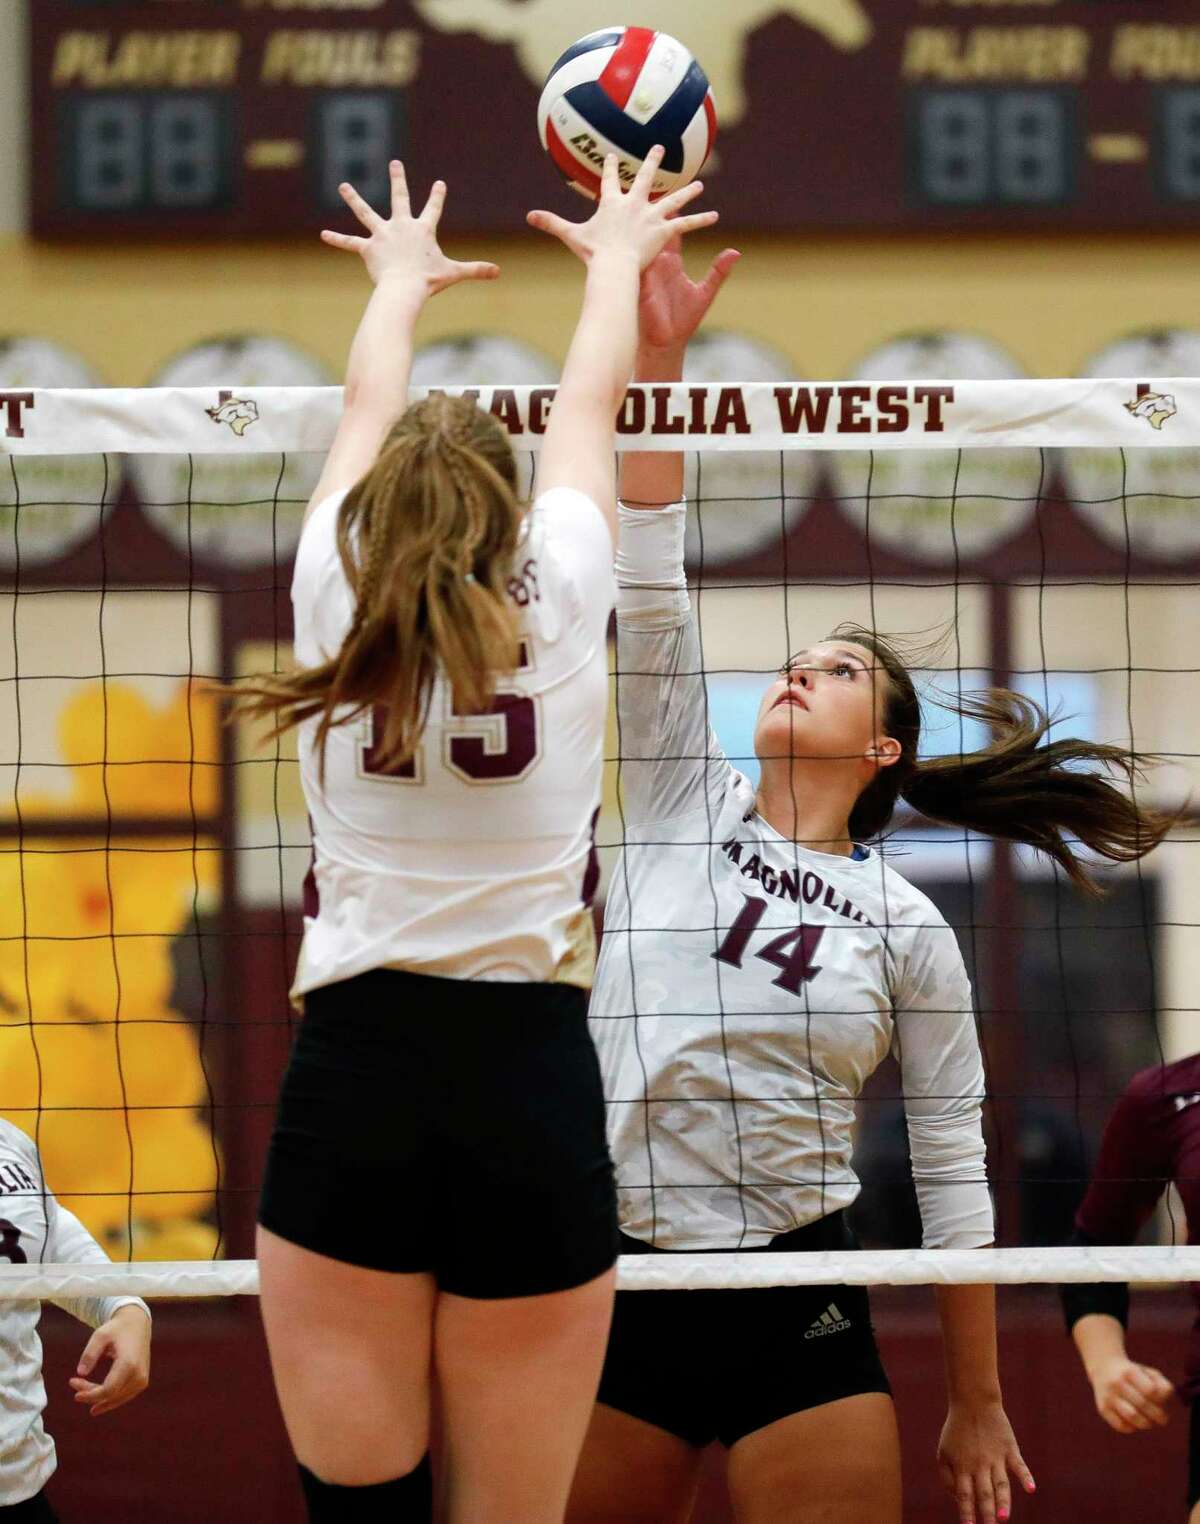 Magnolia’s Alex Bull (14) tips the ball past Magnolia West’s Evan Snook (15) during the third set of a District 19-5A high school volleyball match at Magnolia West High School, Tuesday, Sept. 21, 2021, in Magnolia.